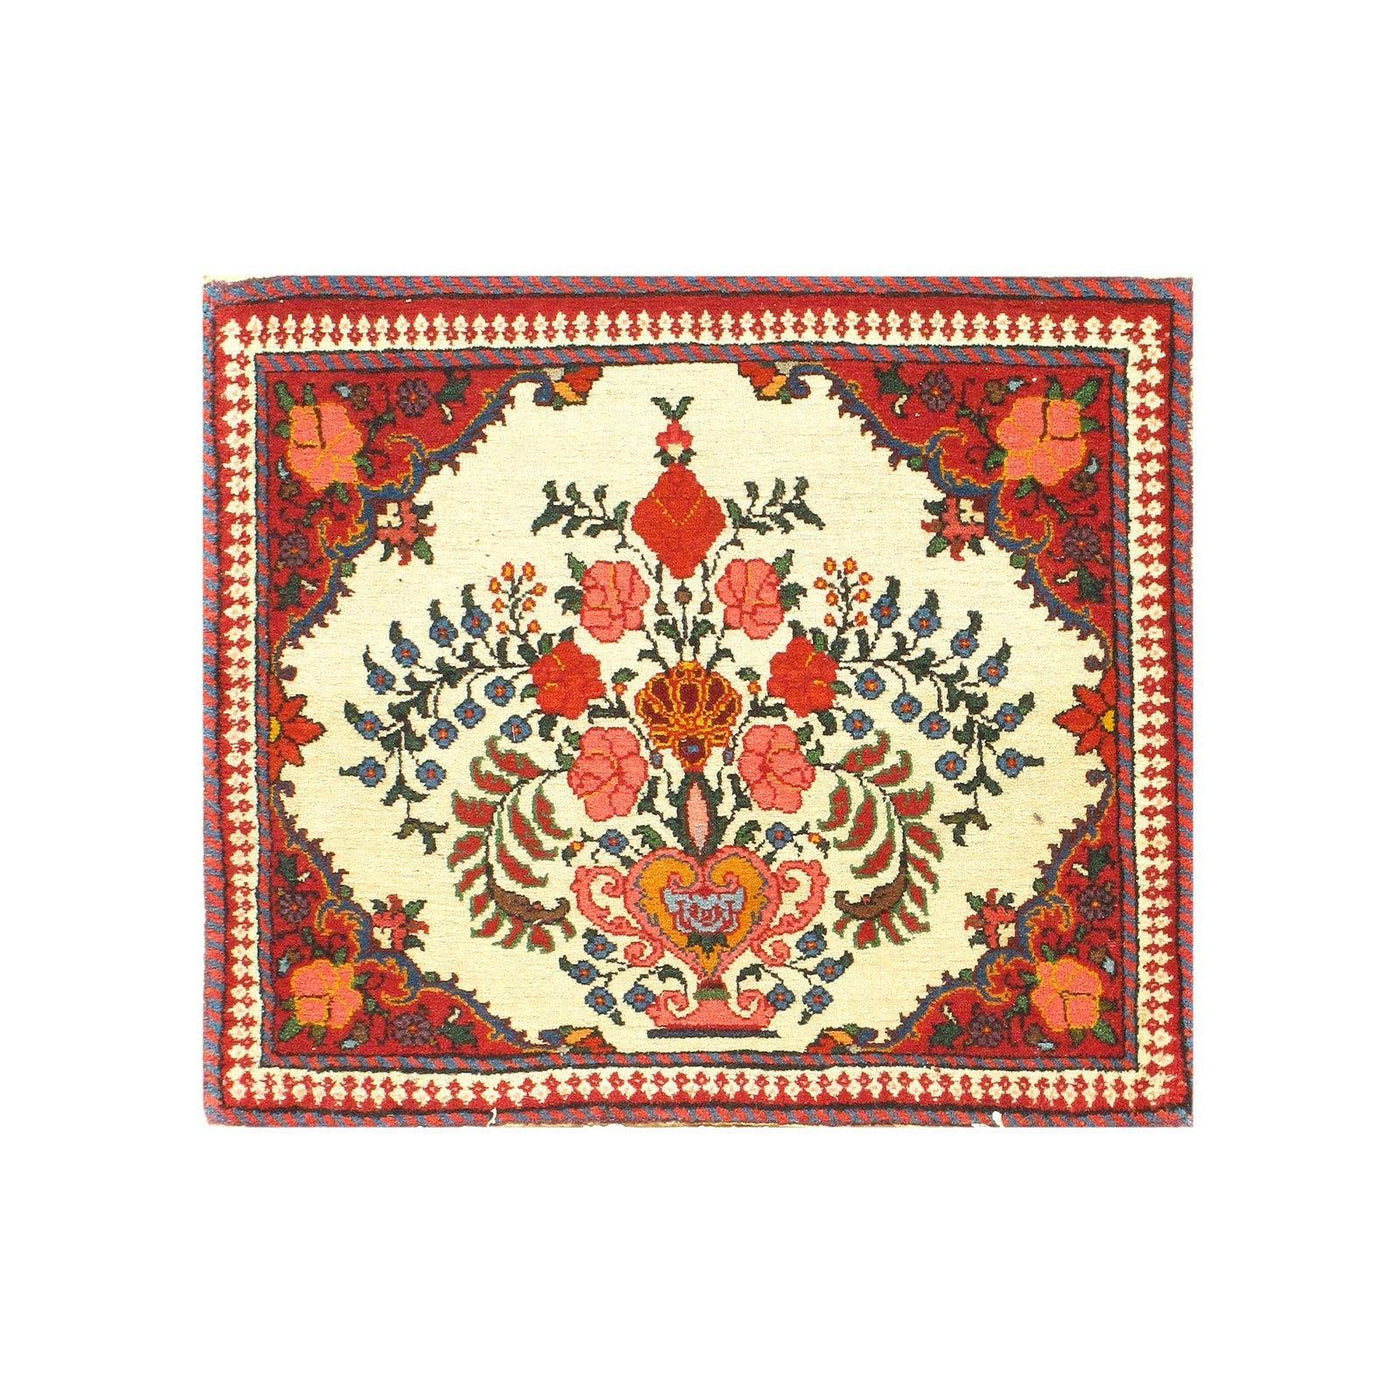 Canvello Persian Bakhtiari Small Rugs For Bedroom - 2' x 2'4"